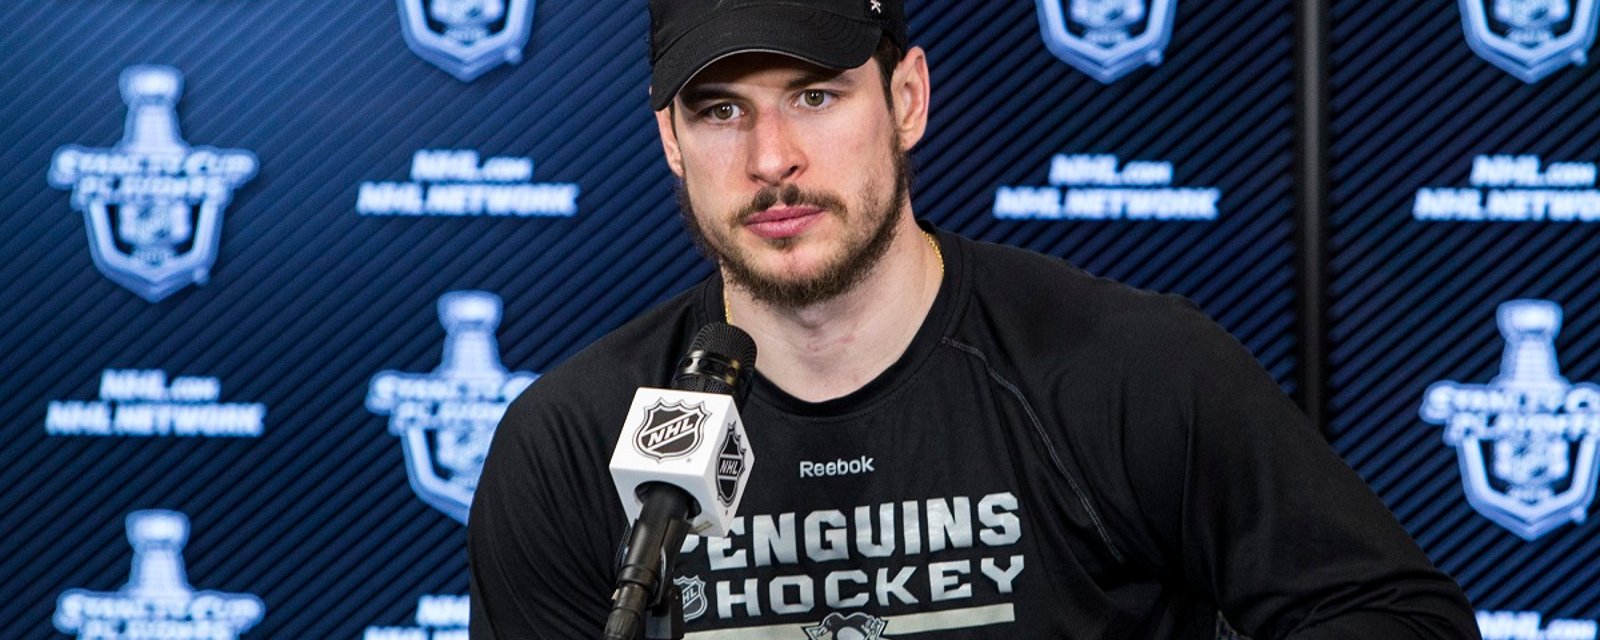 Rumor: Did the Penguins and Sidney Crosby lie about his injury?